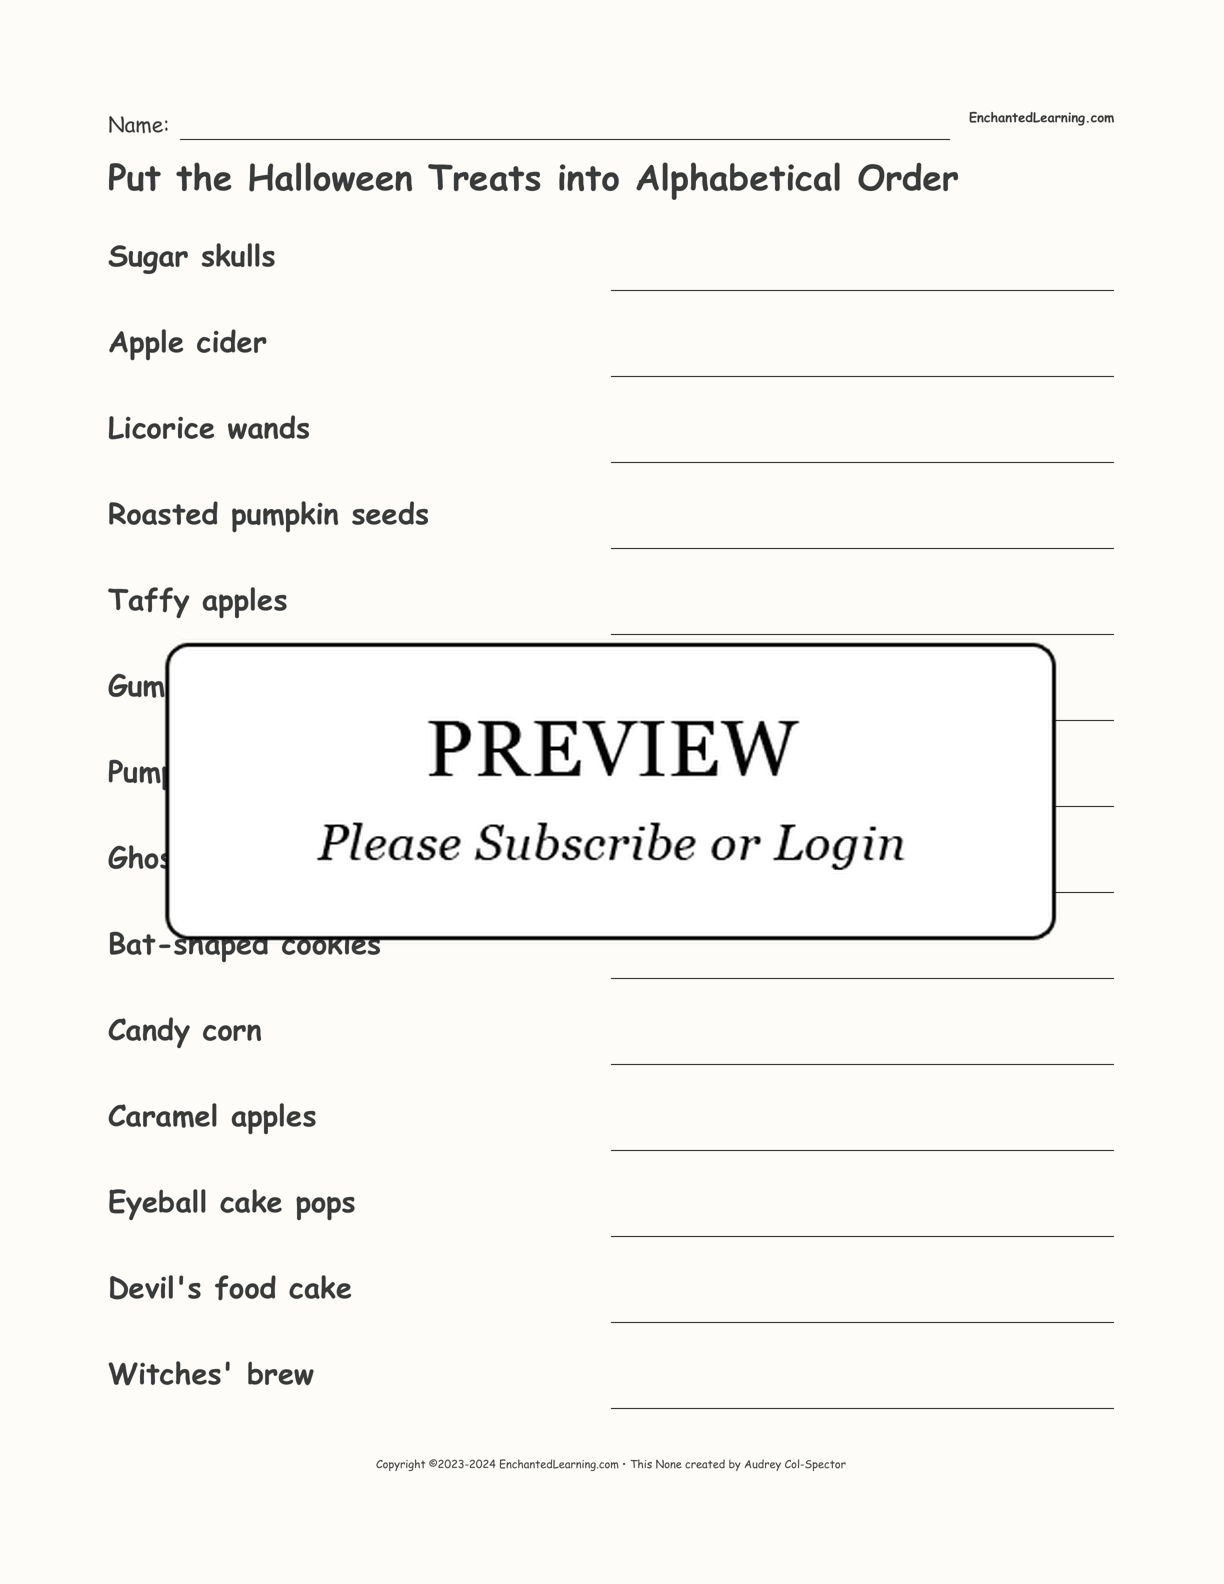 Put the Halloween Treats into Alphabetical Order interactive worksheet page 1